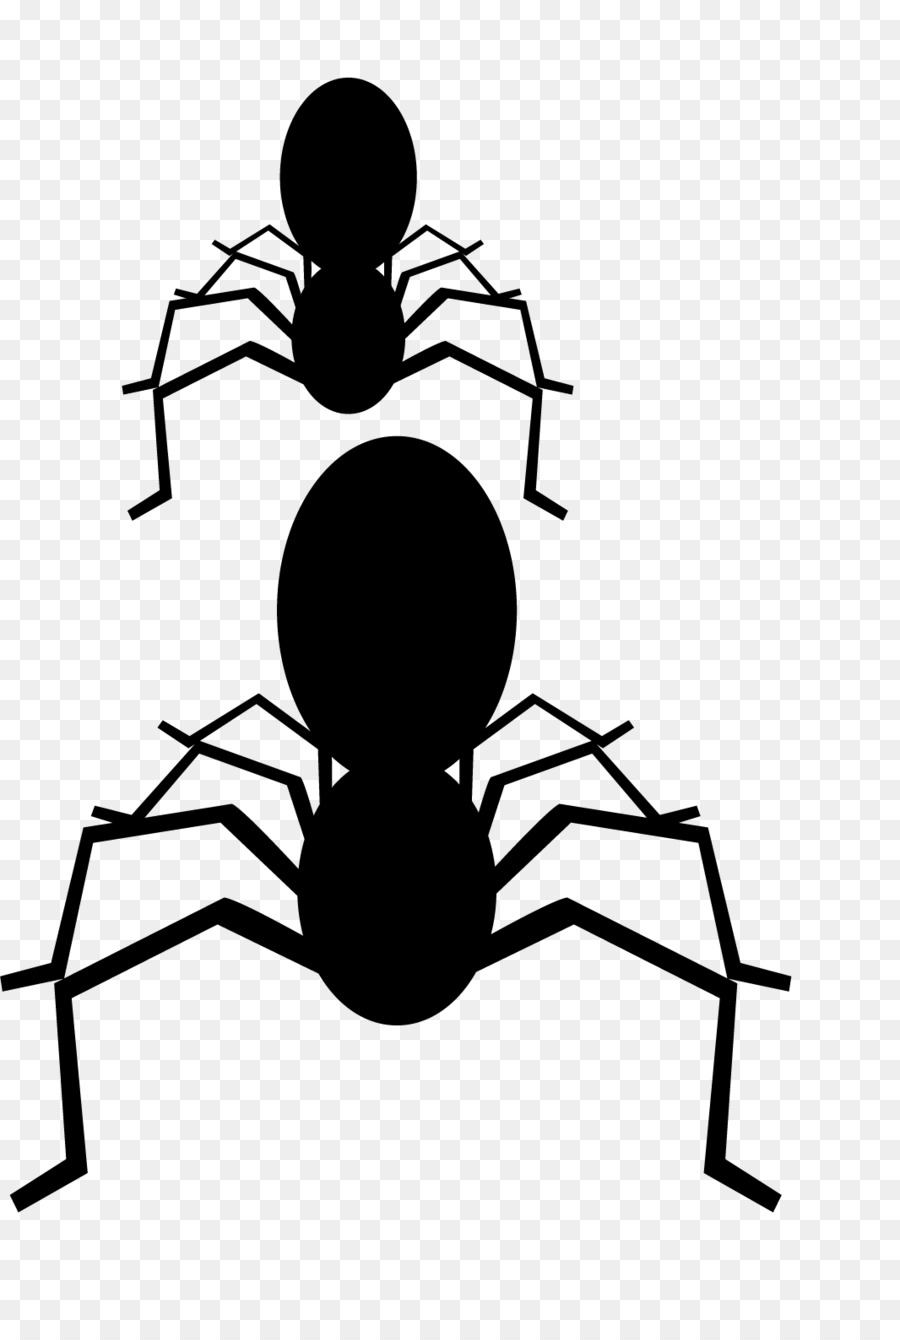 Spider Black and white Clip art - Hand painted black spider png download - 1066*1583 - Free Transparent Spider png Download.